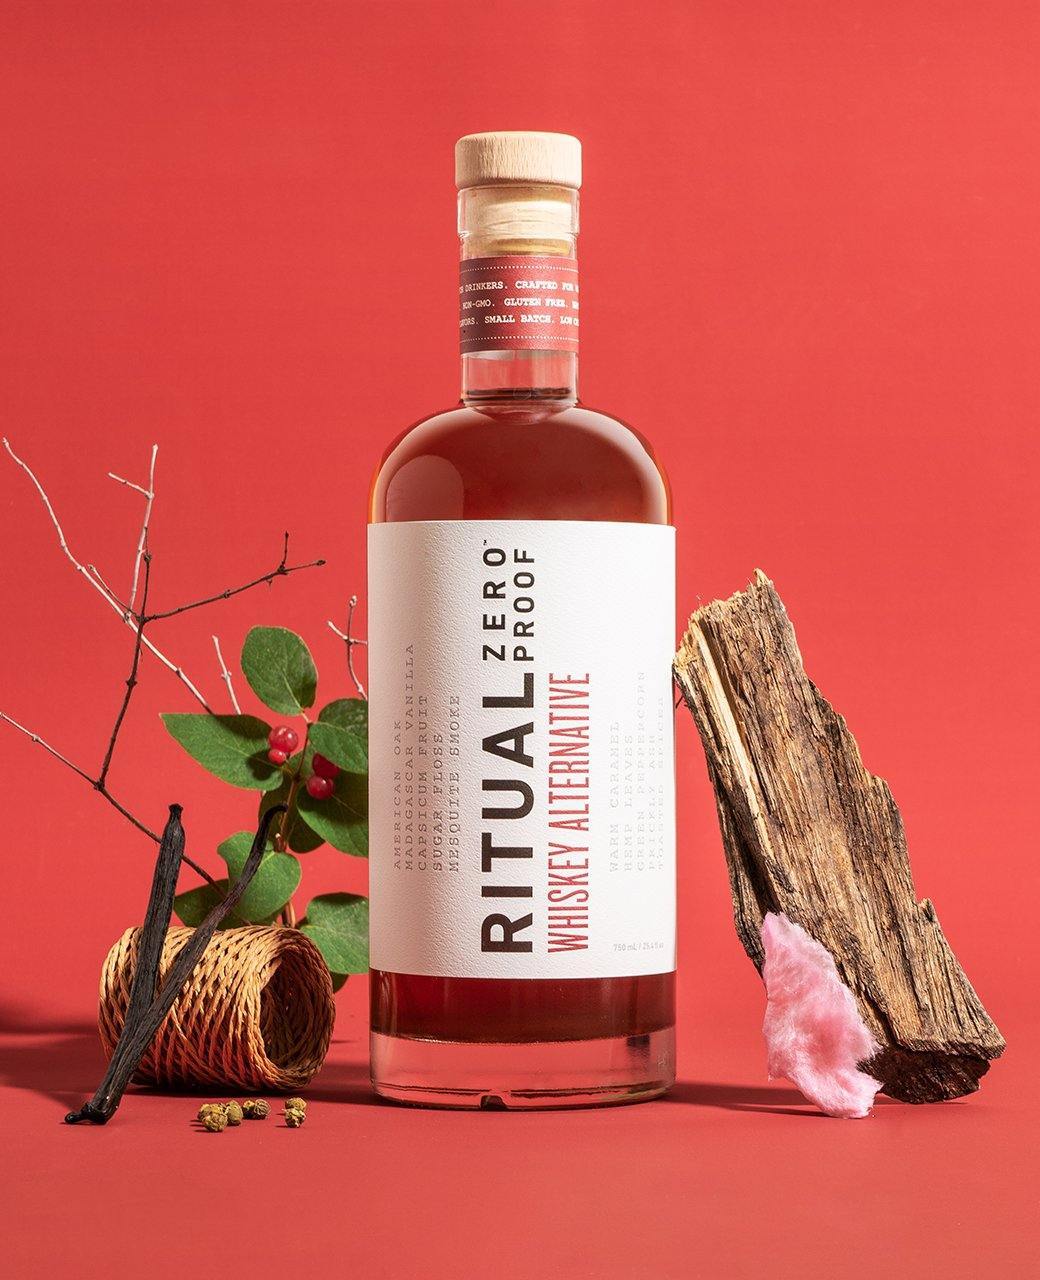 https://cdn.shopify.com/s/files/1/0262/8403/2084/products/ritual-zero-proof-ritual-whiskey-ritual-whiskey-alternative-ritual-whiskey-alternative-750ml-non-alcoholic-spirit-for-cocktails-15901542645844.jpg?v=1631559974